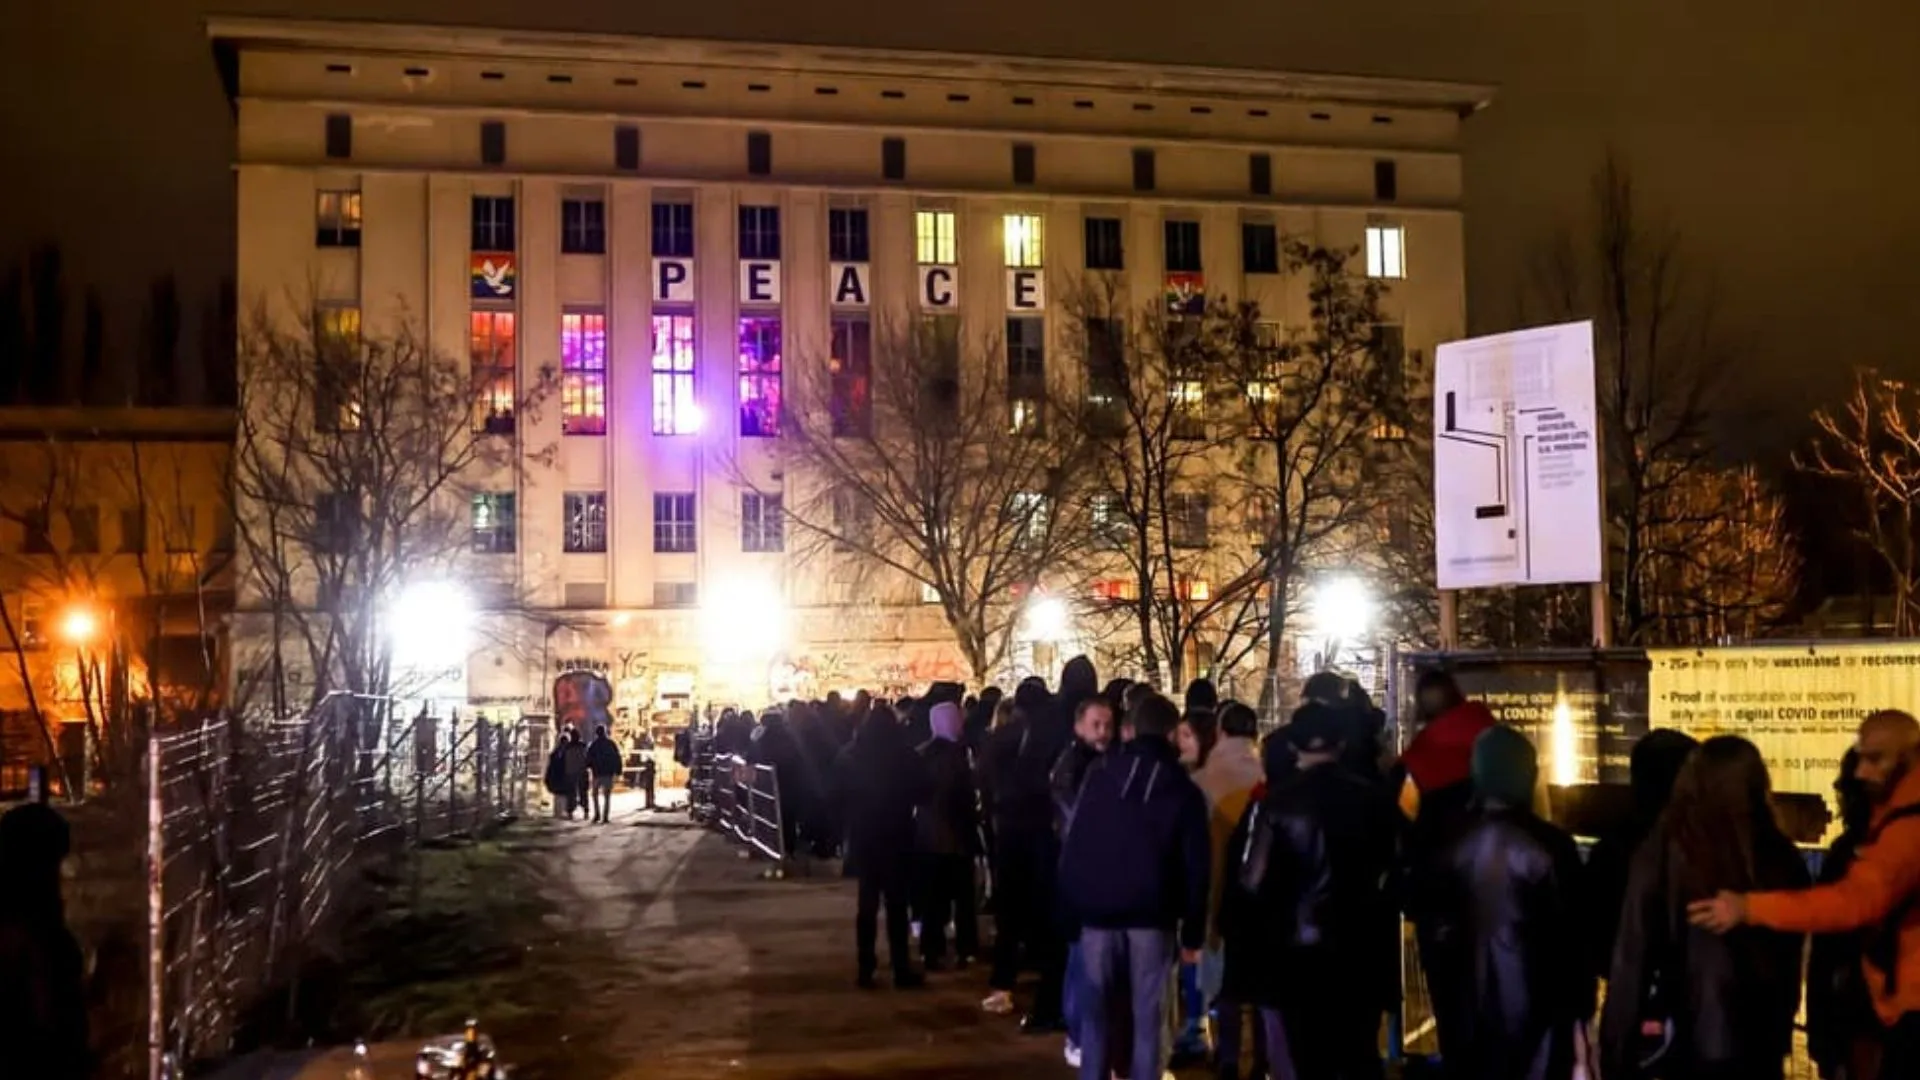 Berghain in Germany, Europe | BDSM Hotels and Сlubs,Sex-Friendly Places,Swinger Clubs - Rated 9.1